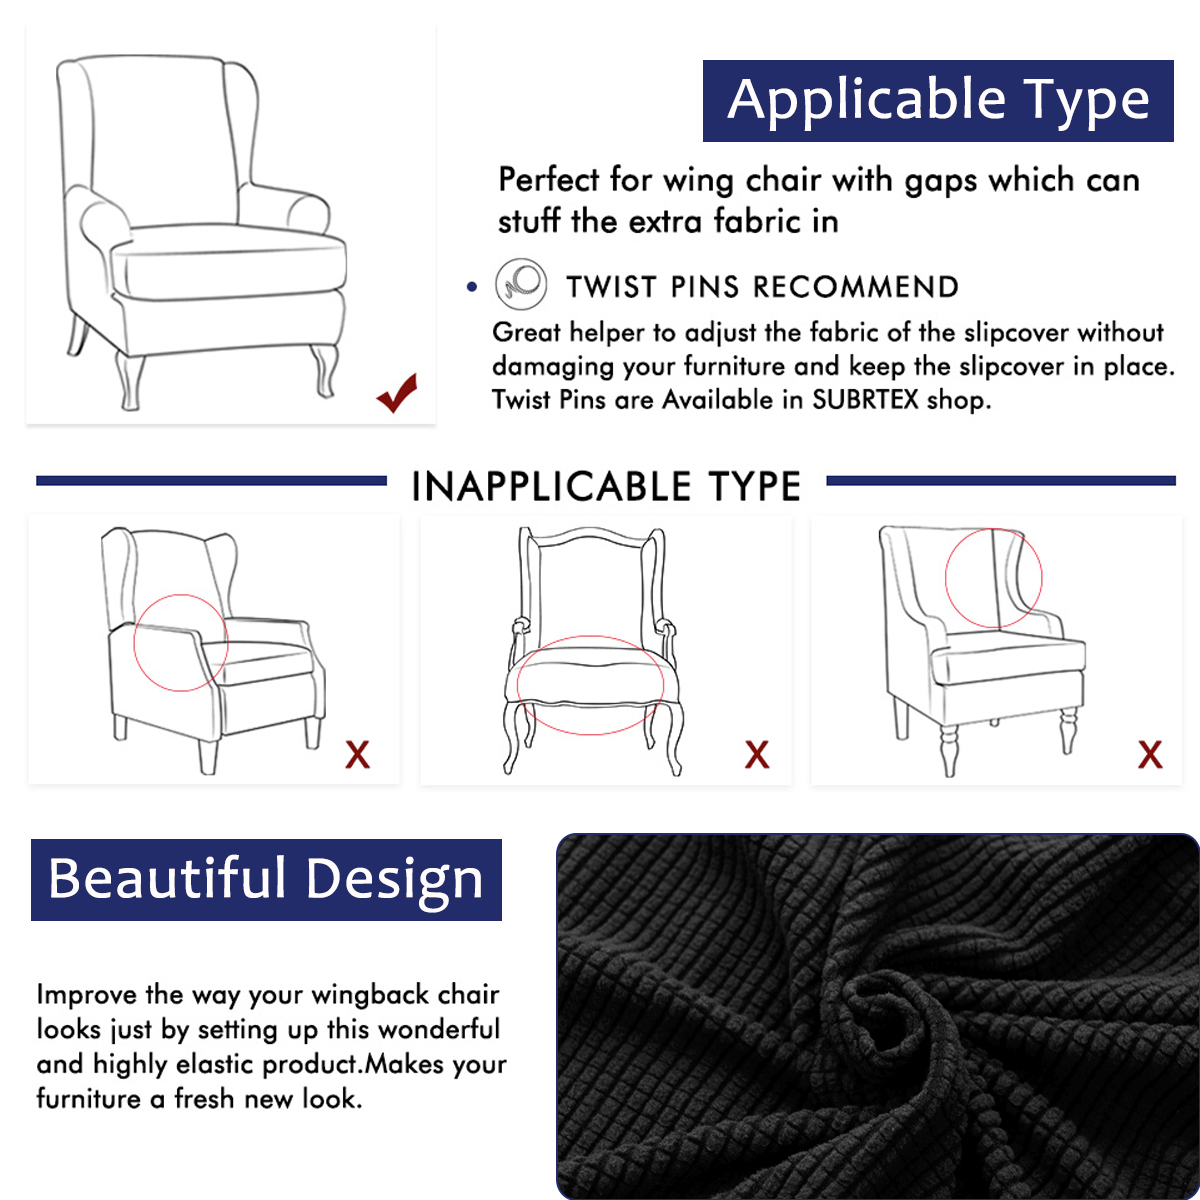 Waterproof-Elastic-Armchair-Wingback-Wing-Chair-Slipcover-Protector-Covers-1635286-3